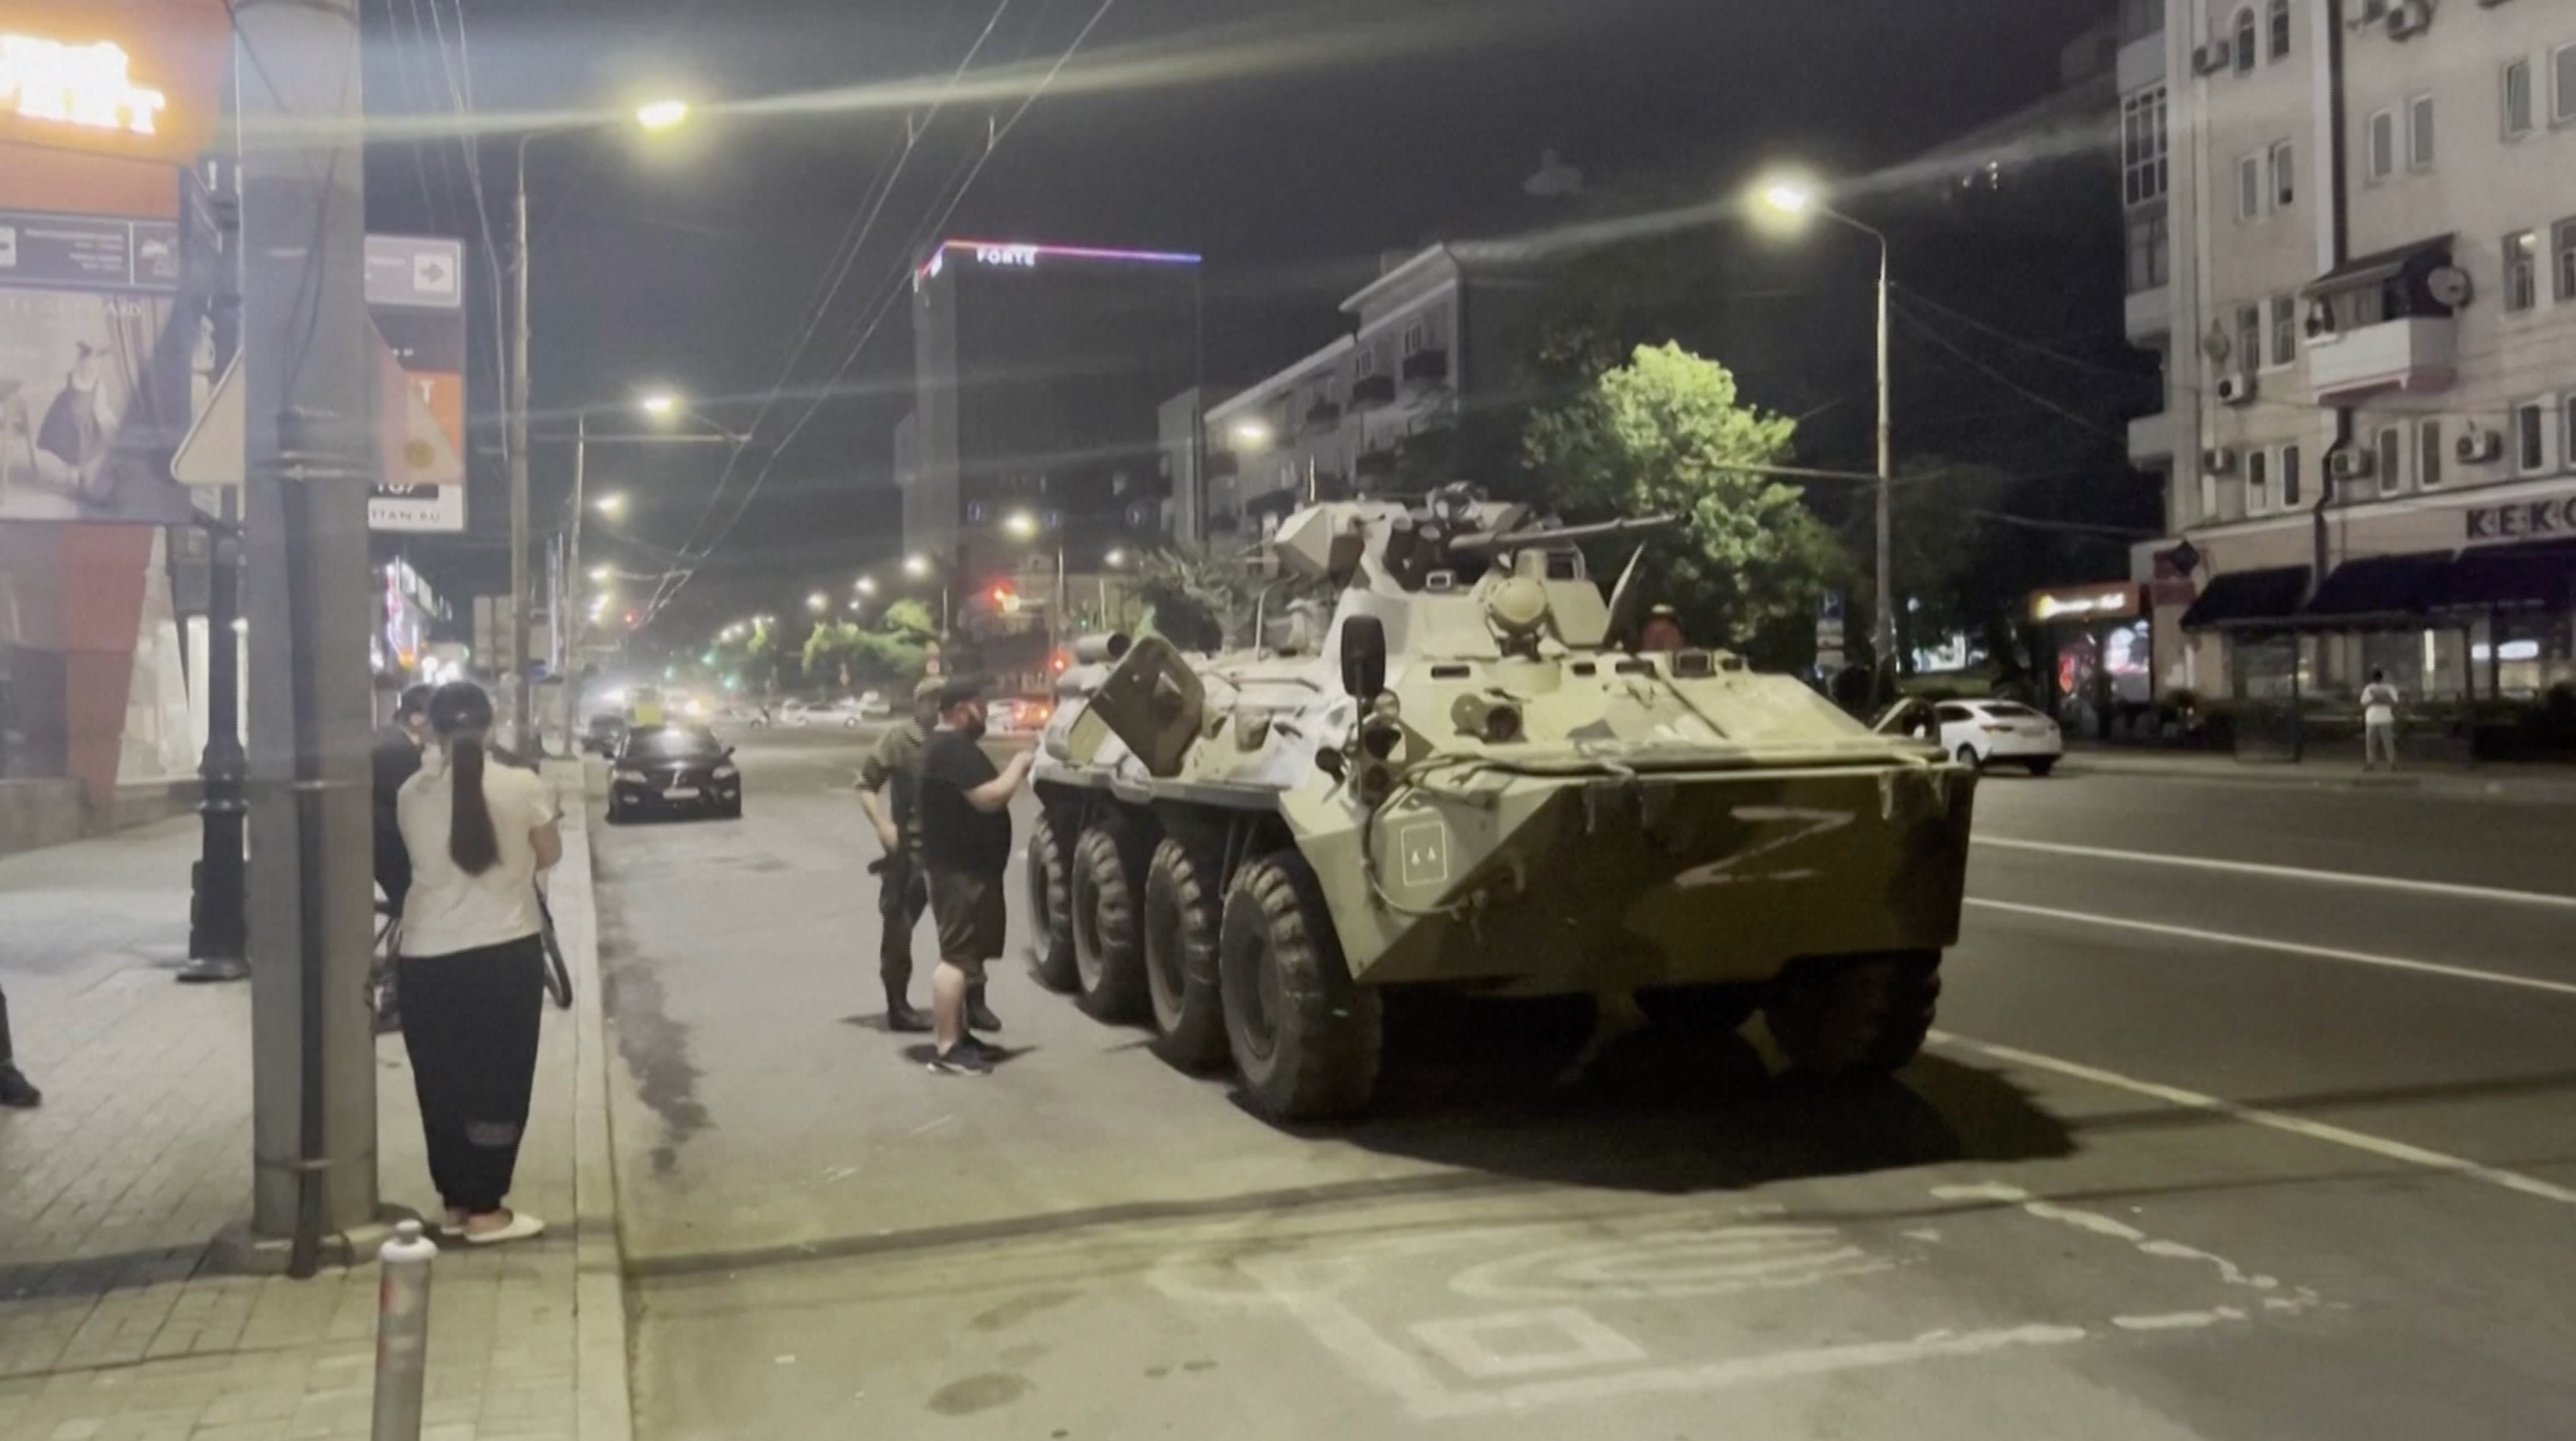 Military vehicles seen in Russia's Rostov as security is tightened over Wagner 'coup' on June 24, 2023.